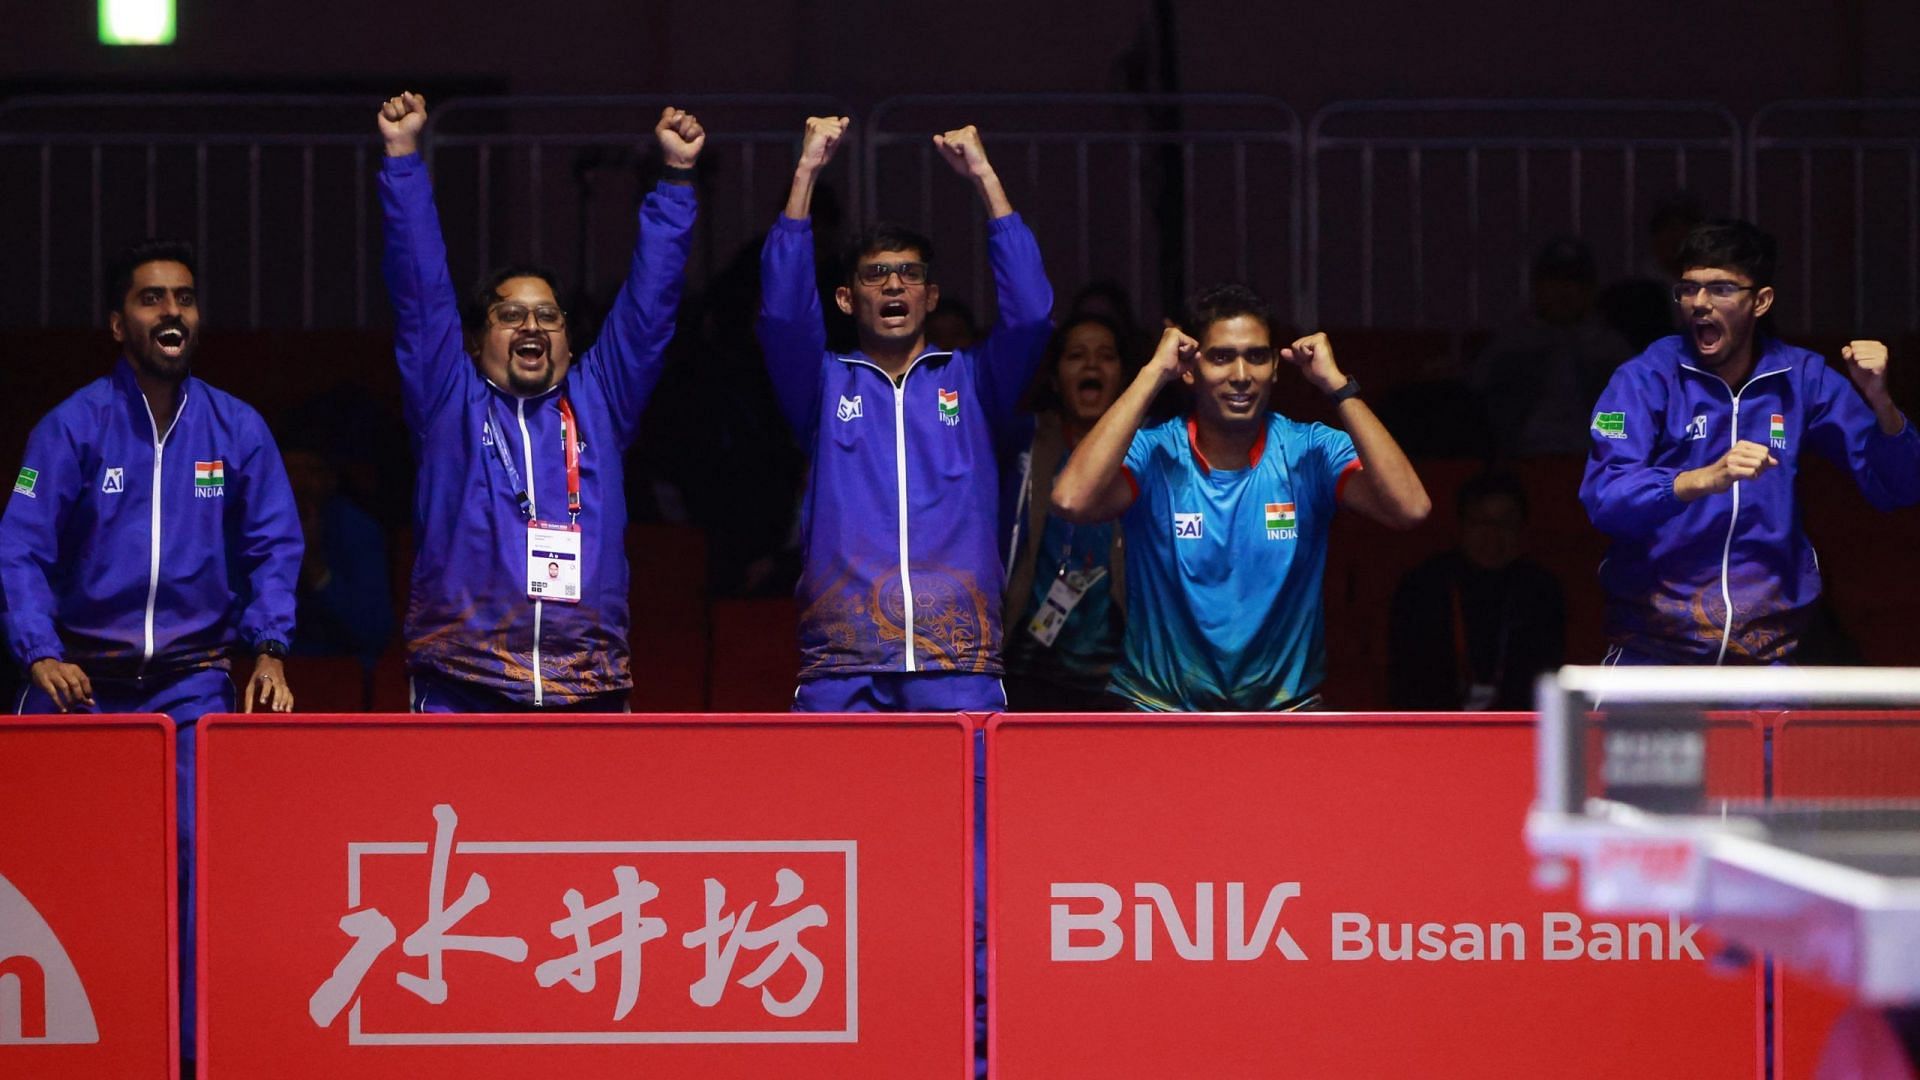 The Indian Men&#039;s Table Tennis Team players celebrate a victory (Image Credits: ITTF Website)